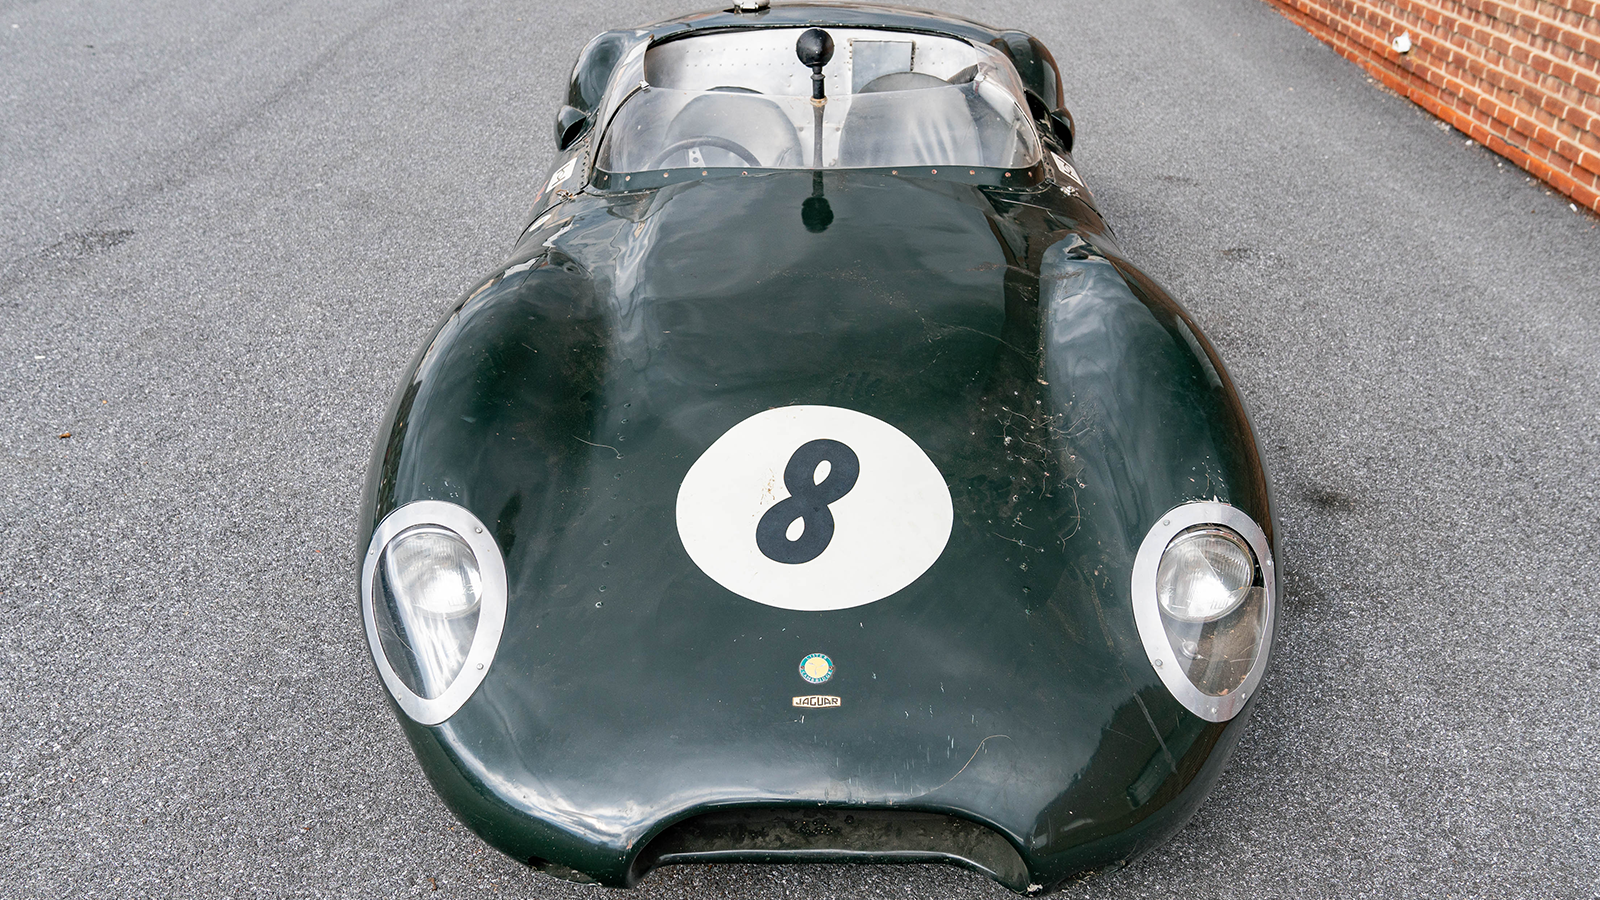 Lost Jaguar collection heads to auction